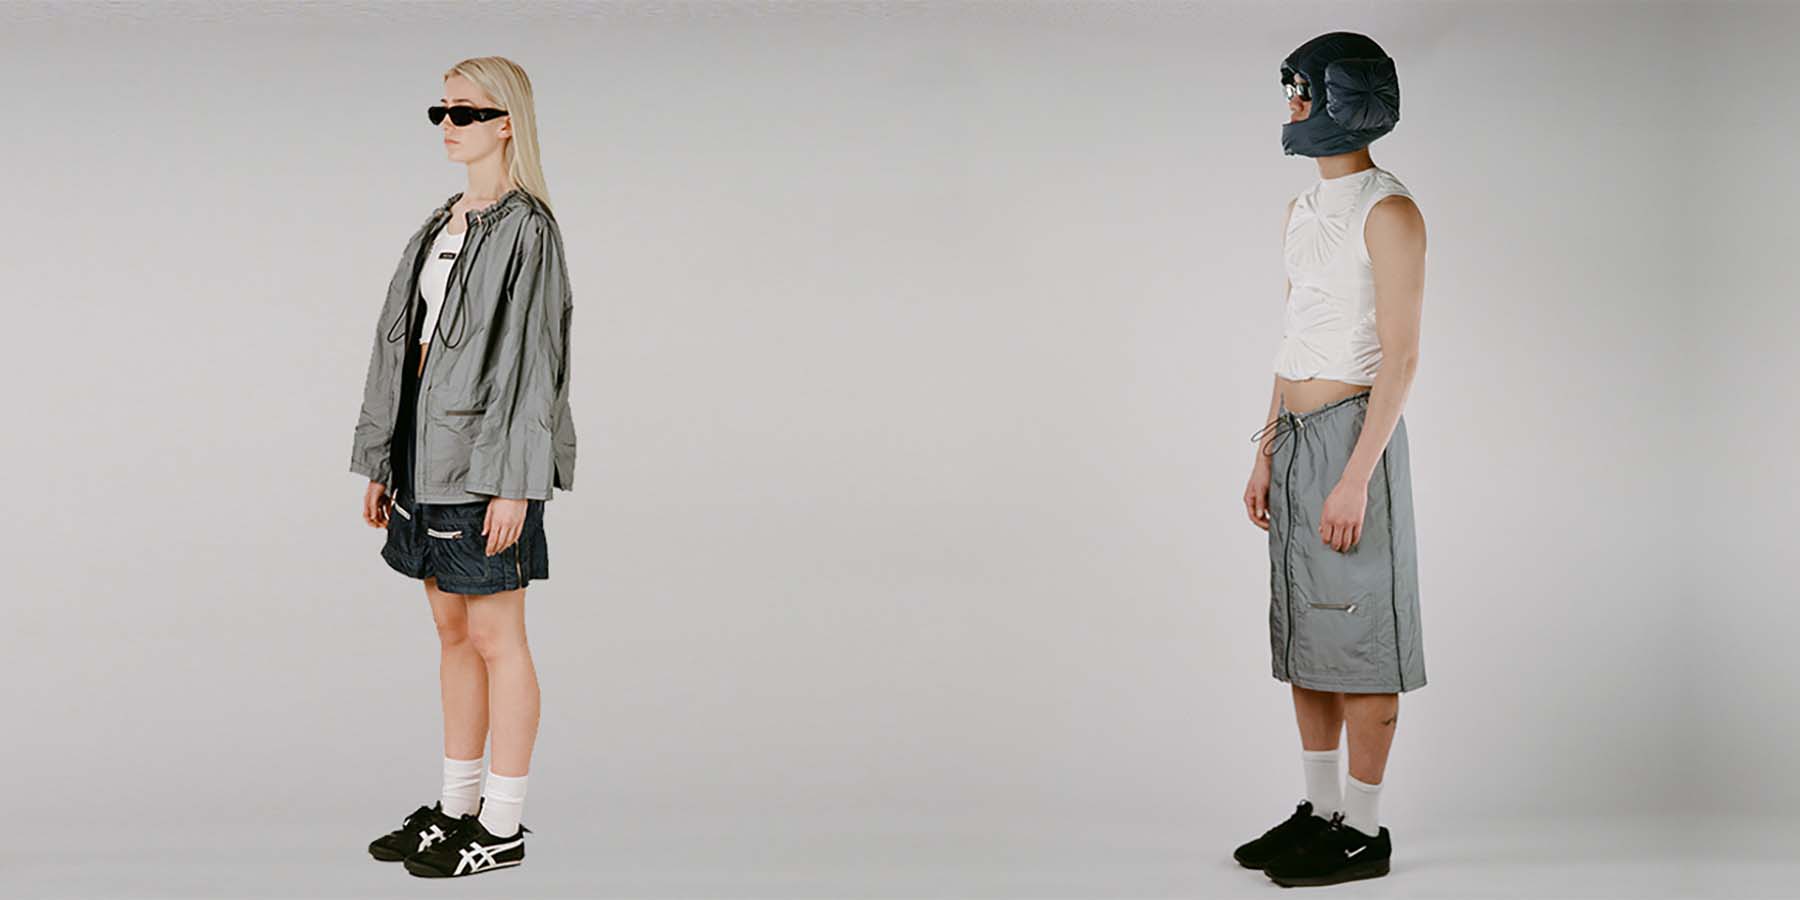 Look 7 and Look 8 of the Futurism Collection